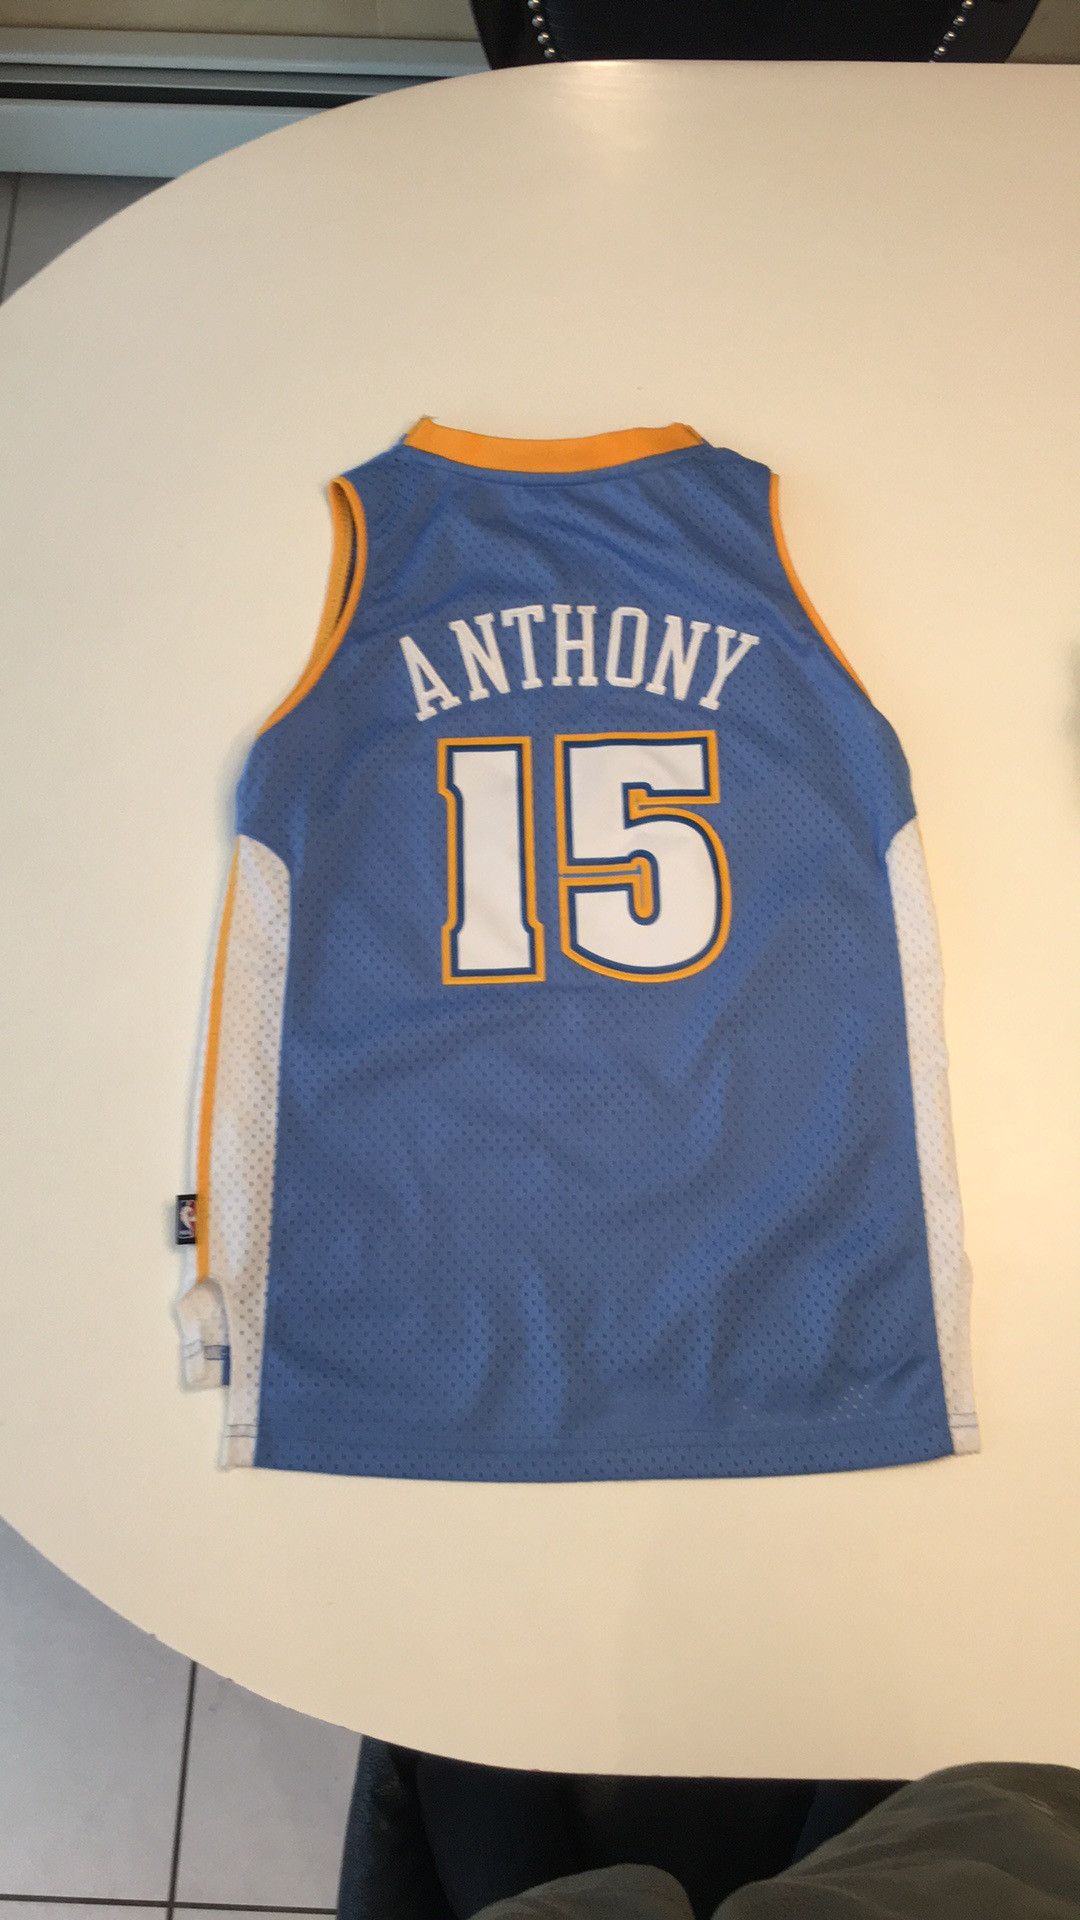 Adidas Carmelo Anthony NBA Jersey Denver Nuggets Youth M Vintage Size US XXS / EU 40 - 2 Preview